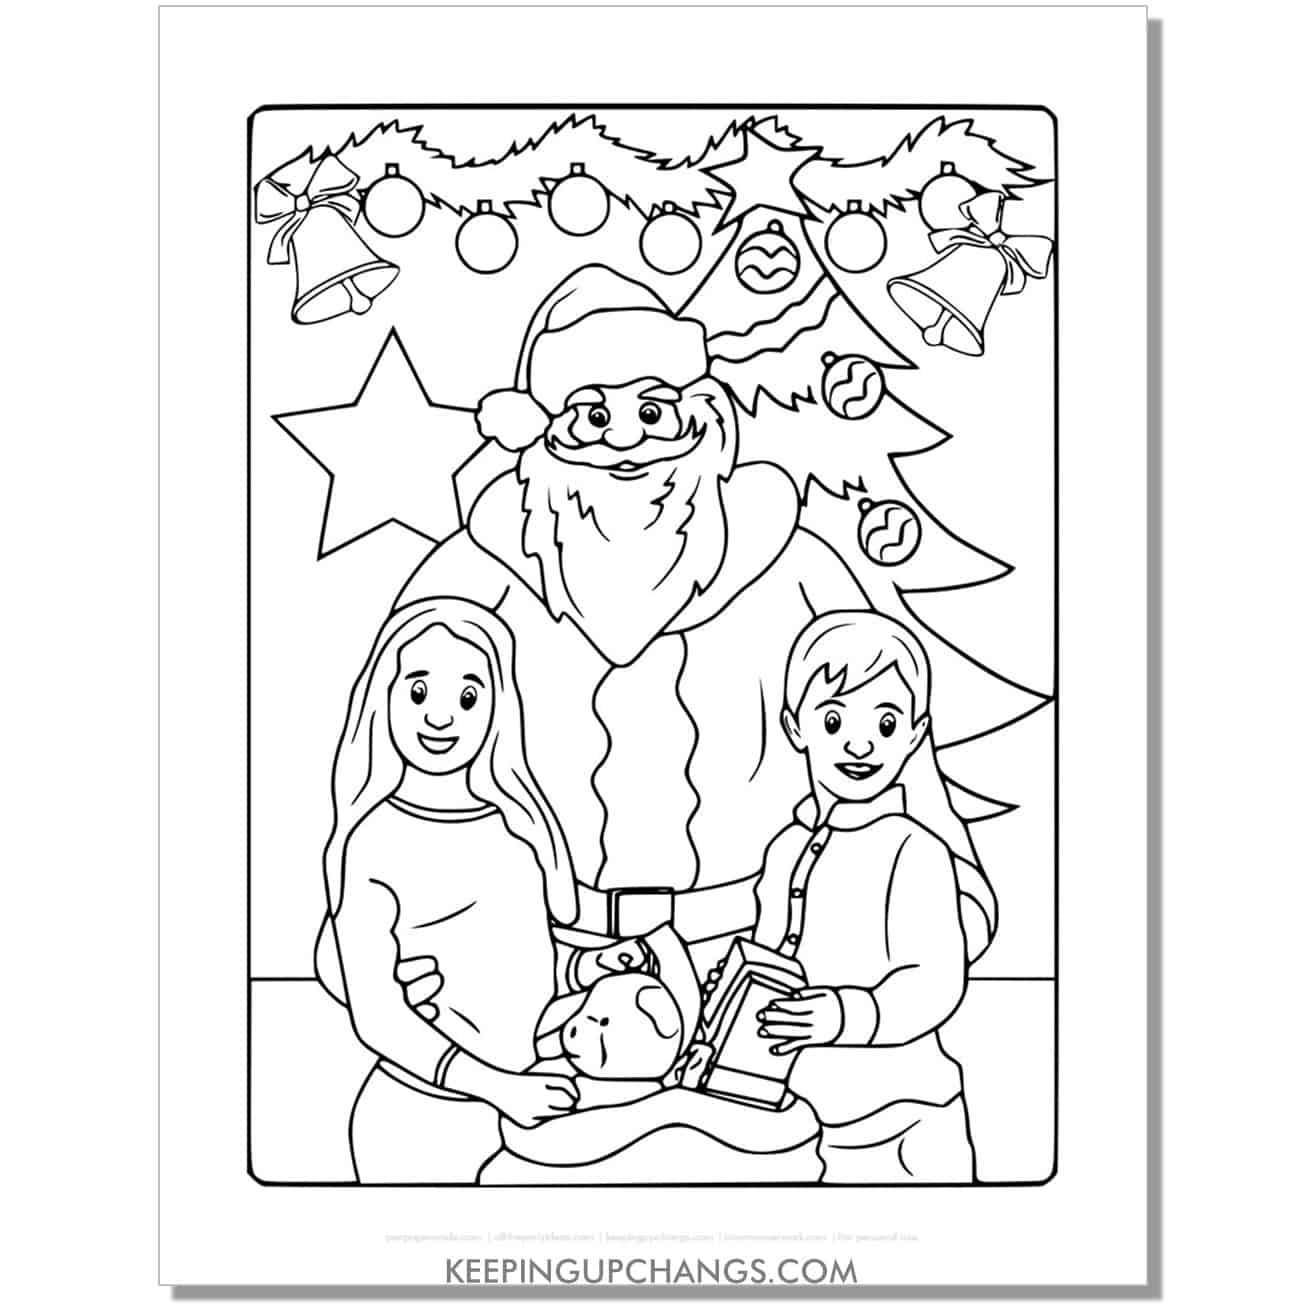 free full size santa with boy and girl coloring page.